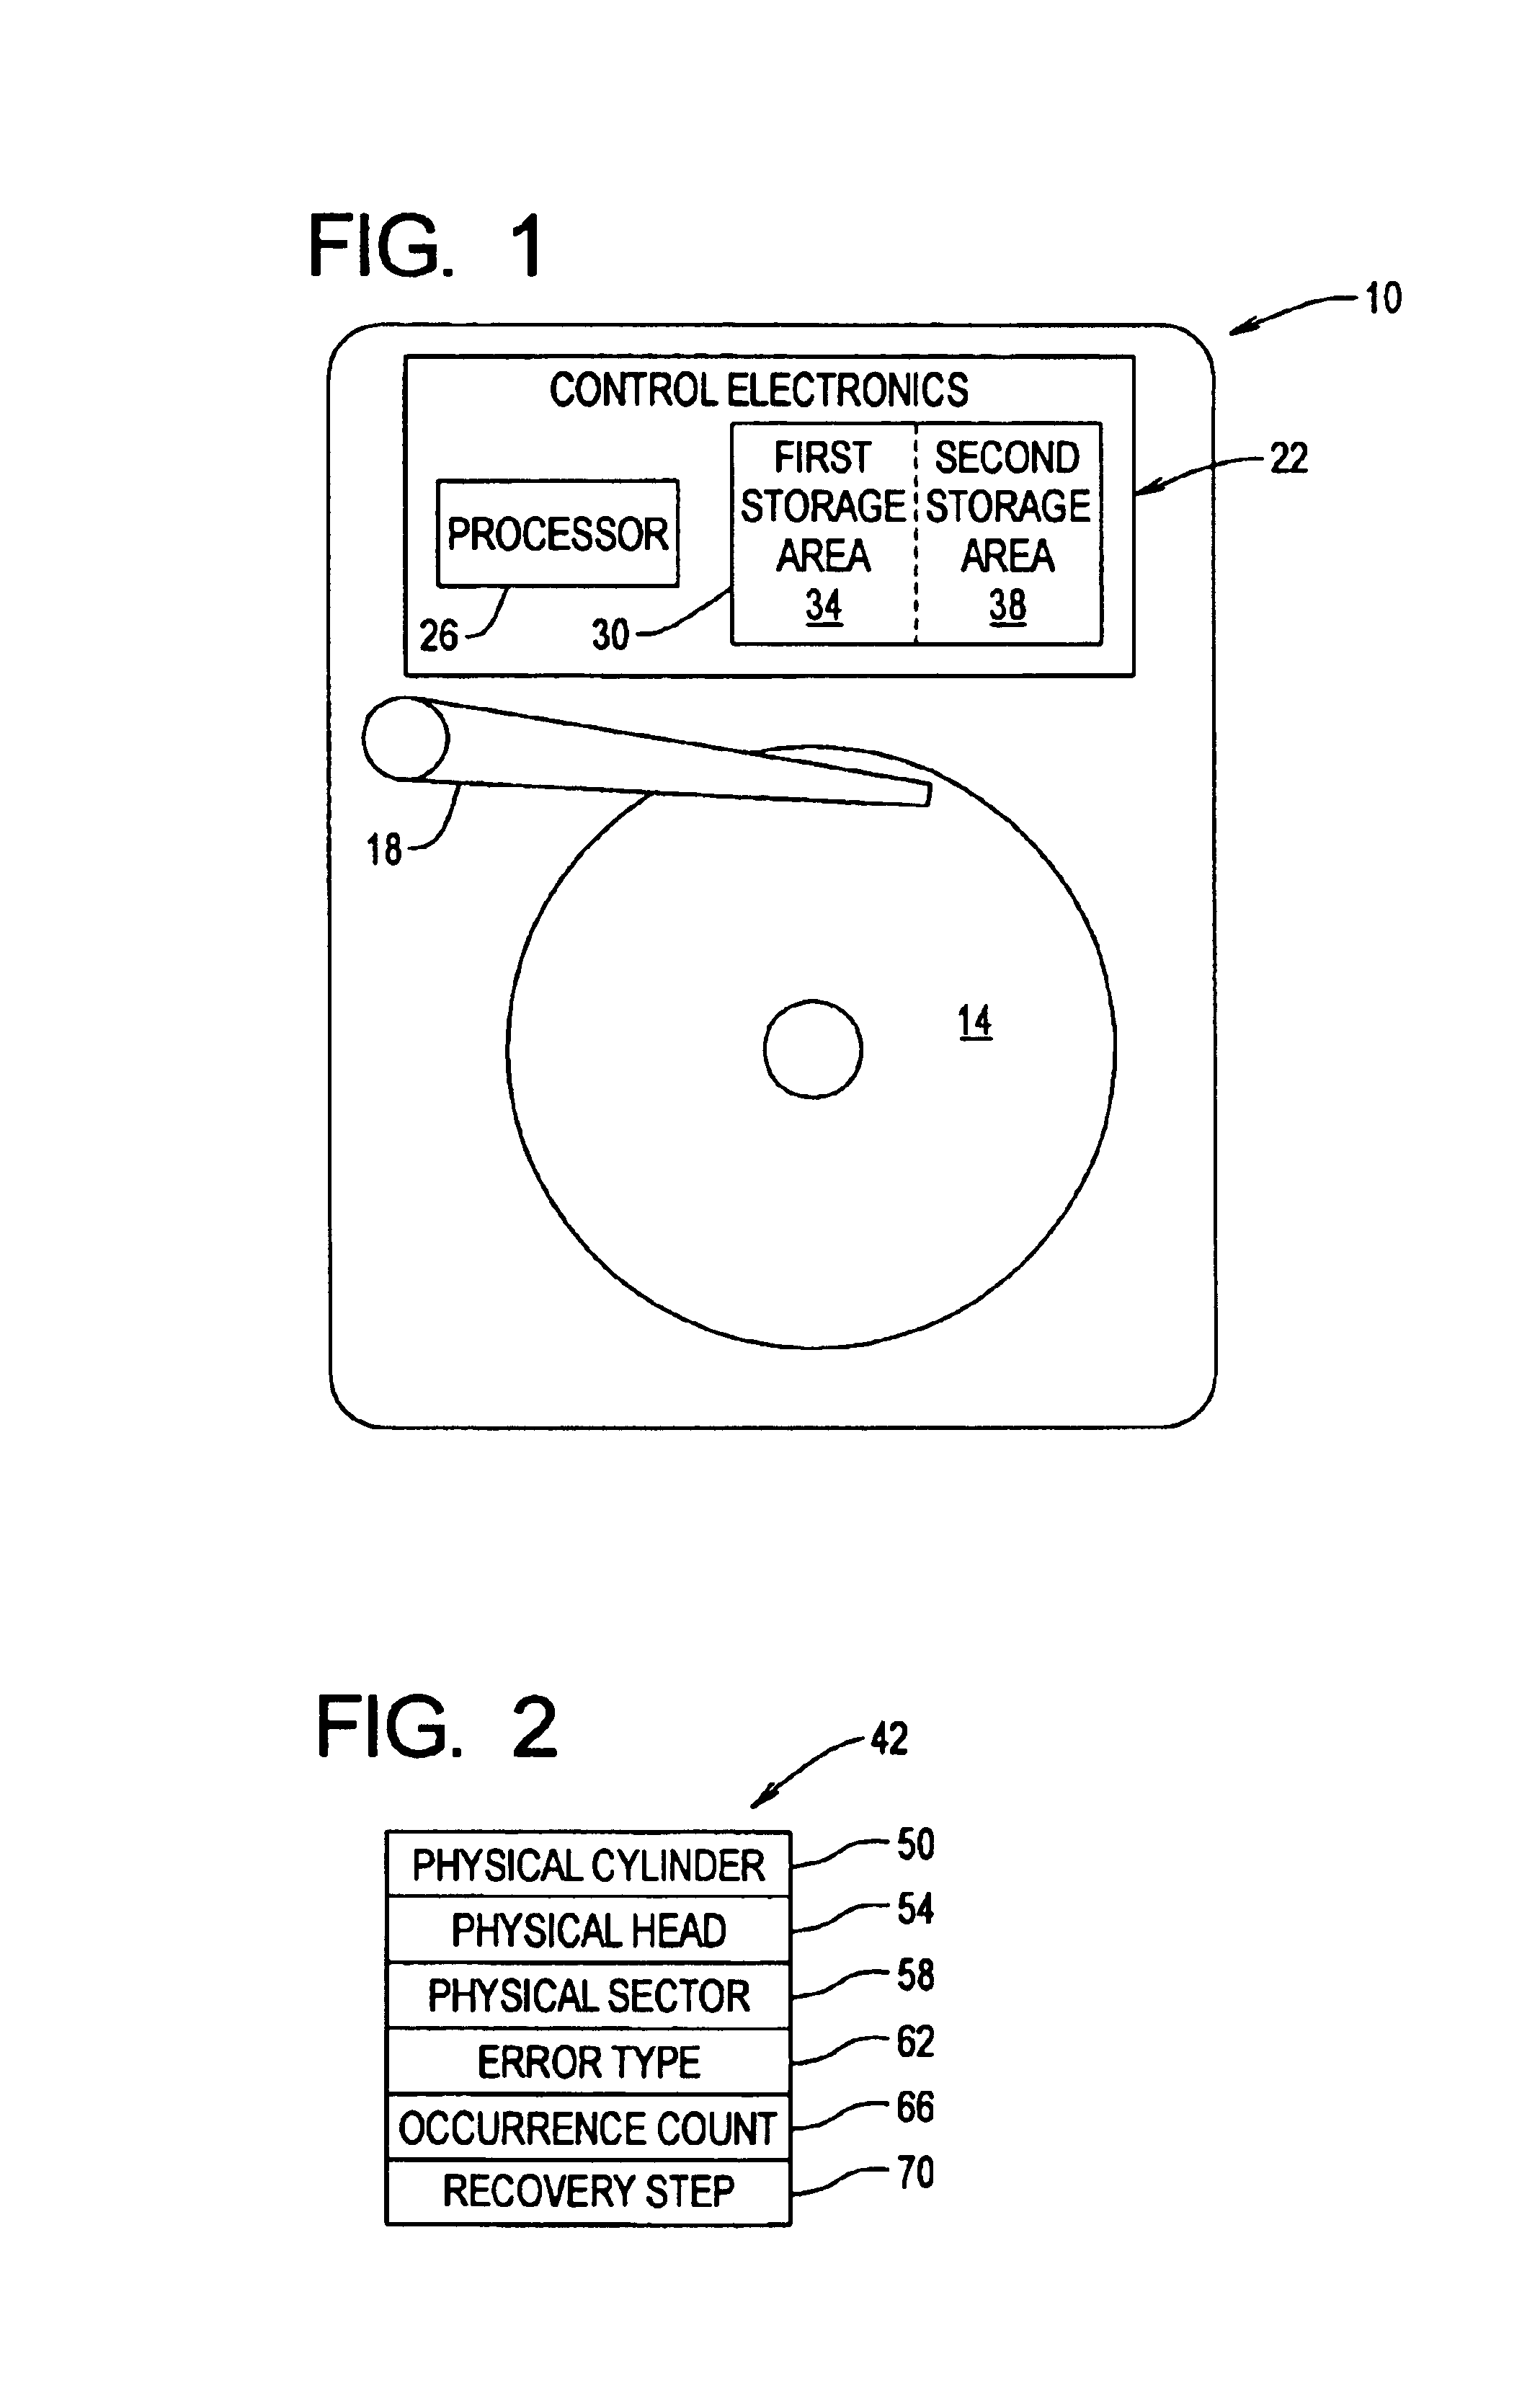 Method and apparatus for reducing error recovery time in hard disk drive